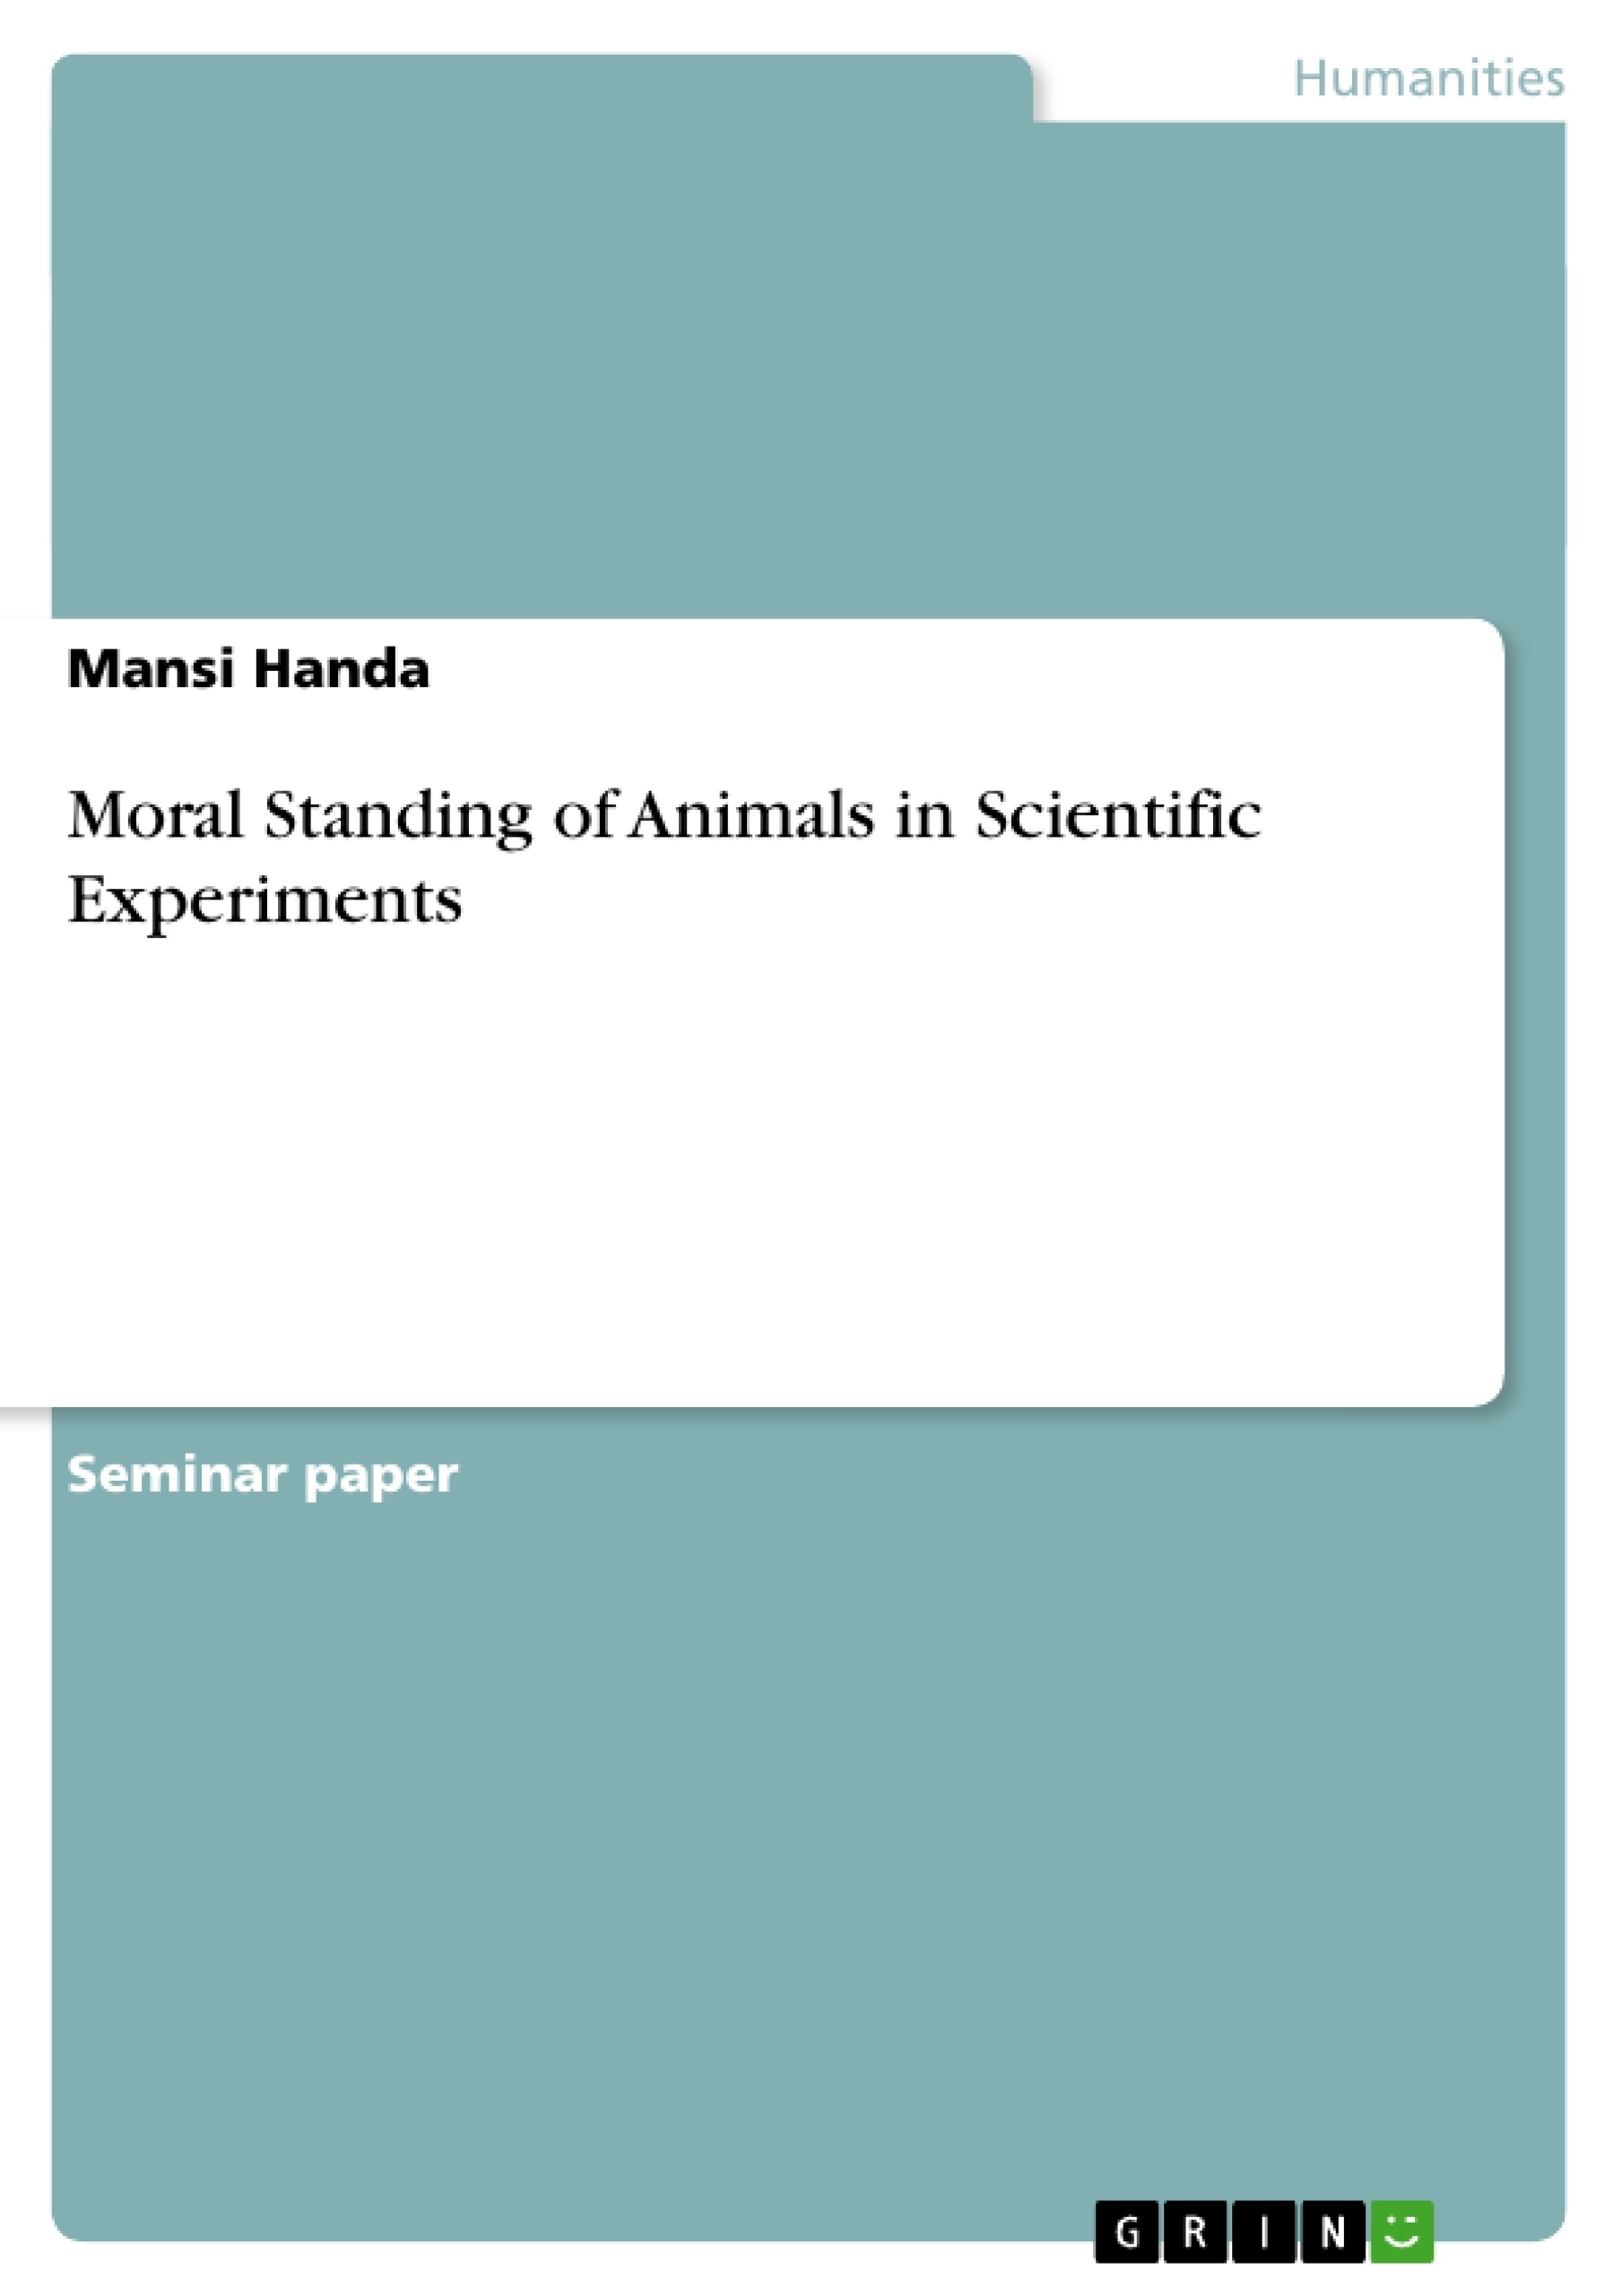 Title: Moral Standing of Animals in Scientific Experiments